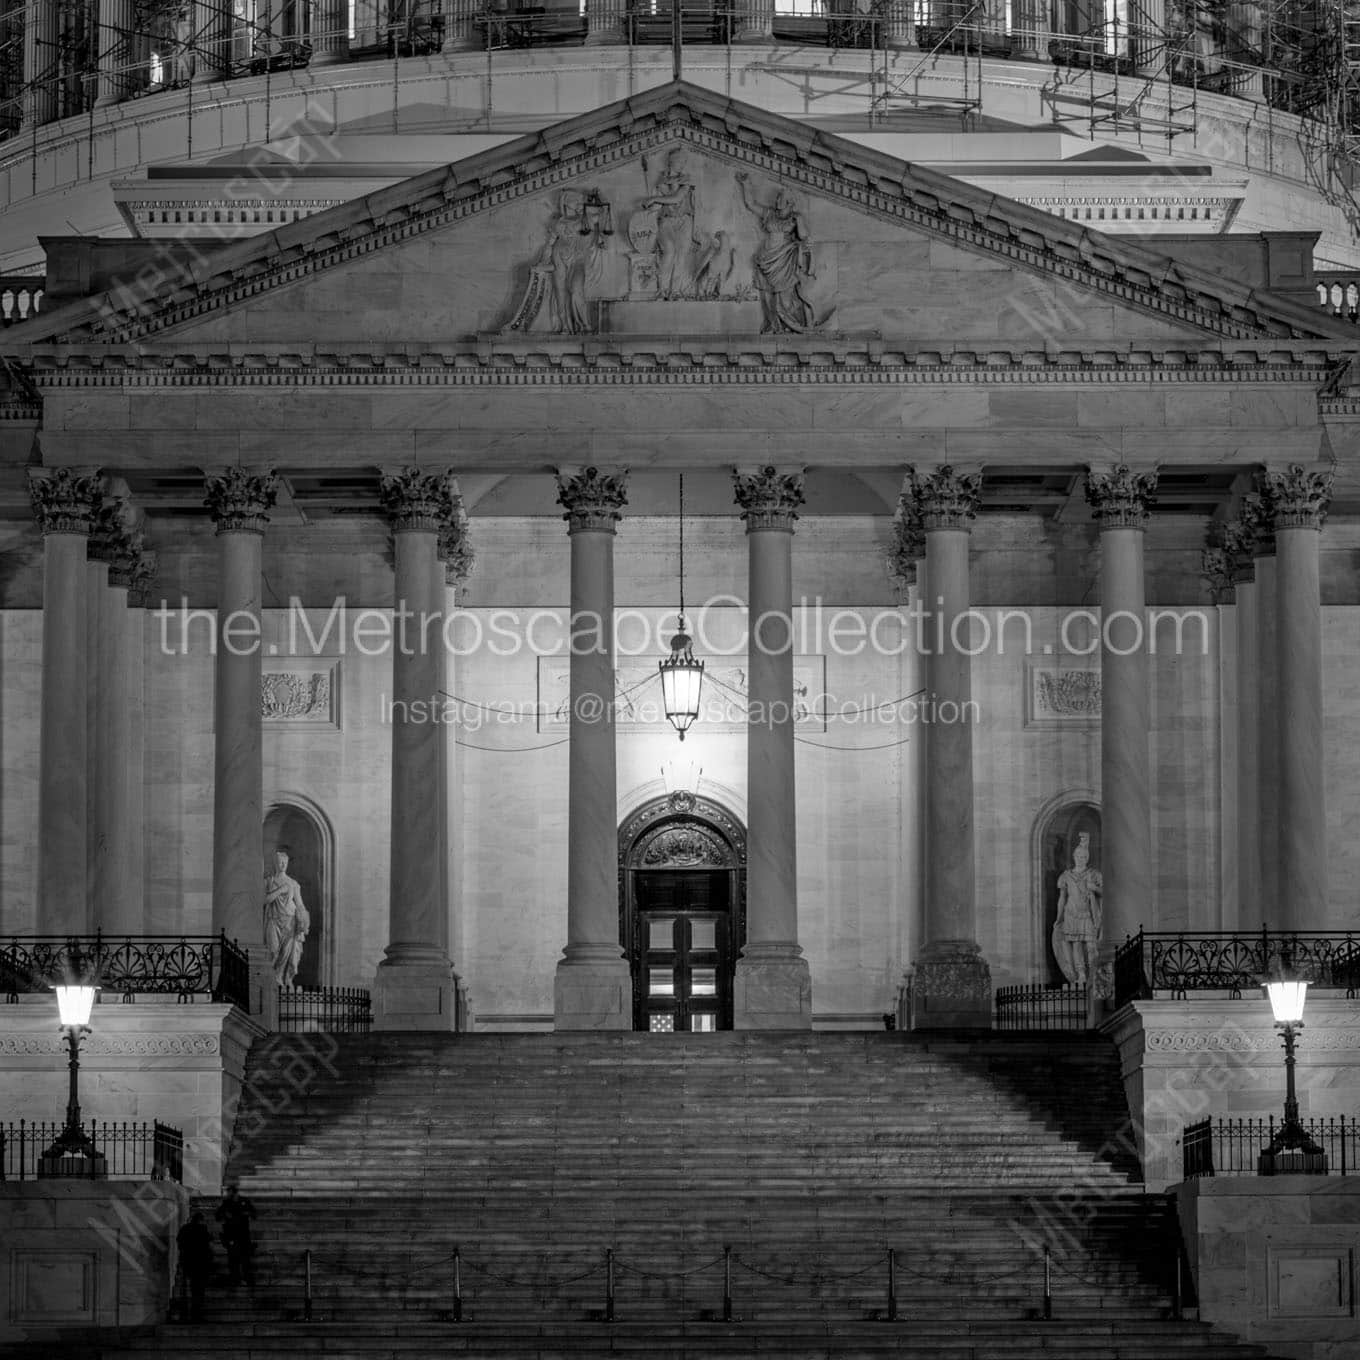 east side us capitol building at night Black & White Office Art